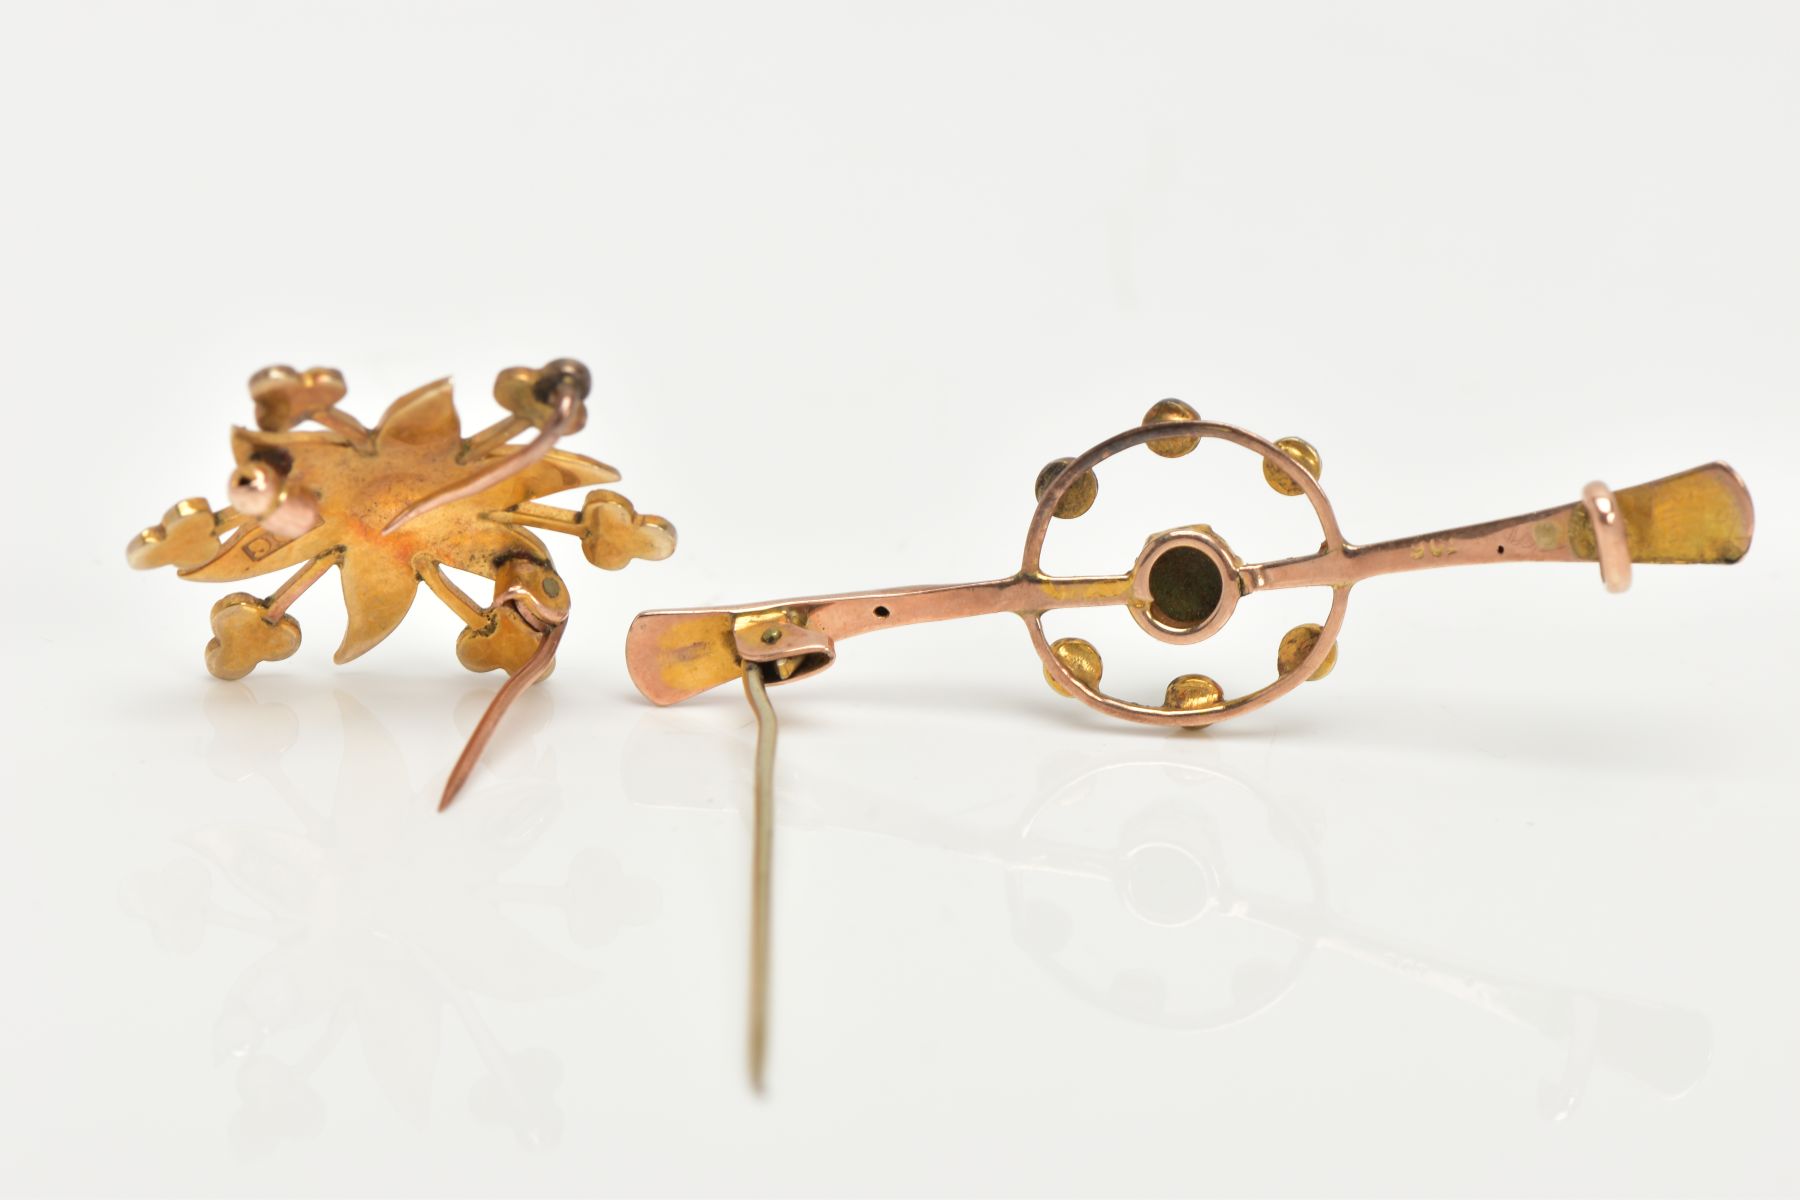 TWO EARLY 20TH CENTRURY GOLD BROOCHES, the first brooch of a yellow gold floral design, set with - Image 4 of 4